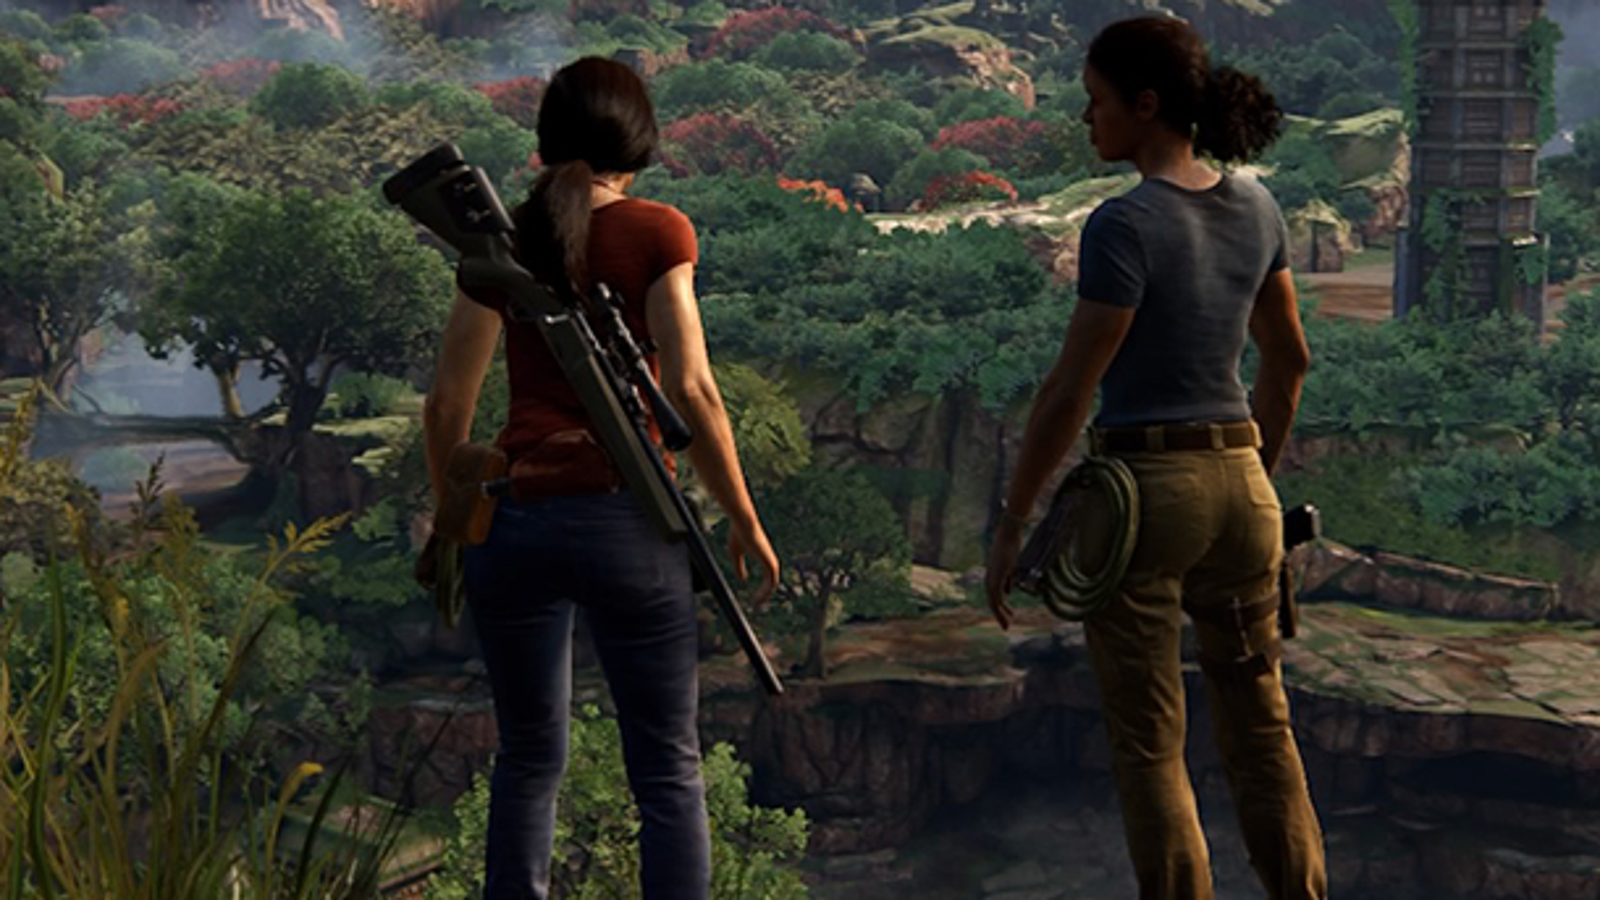 Uncharted 4 Lost Legacy. Анчартед the Lost Legacy. Анчартед 4 утраченное наследие